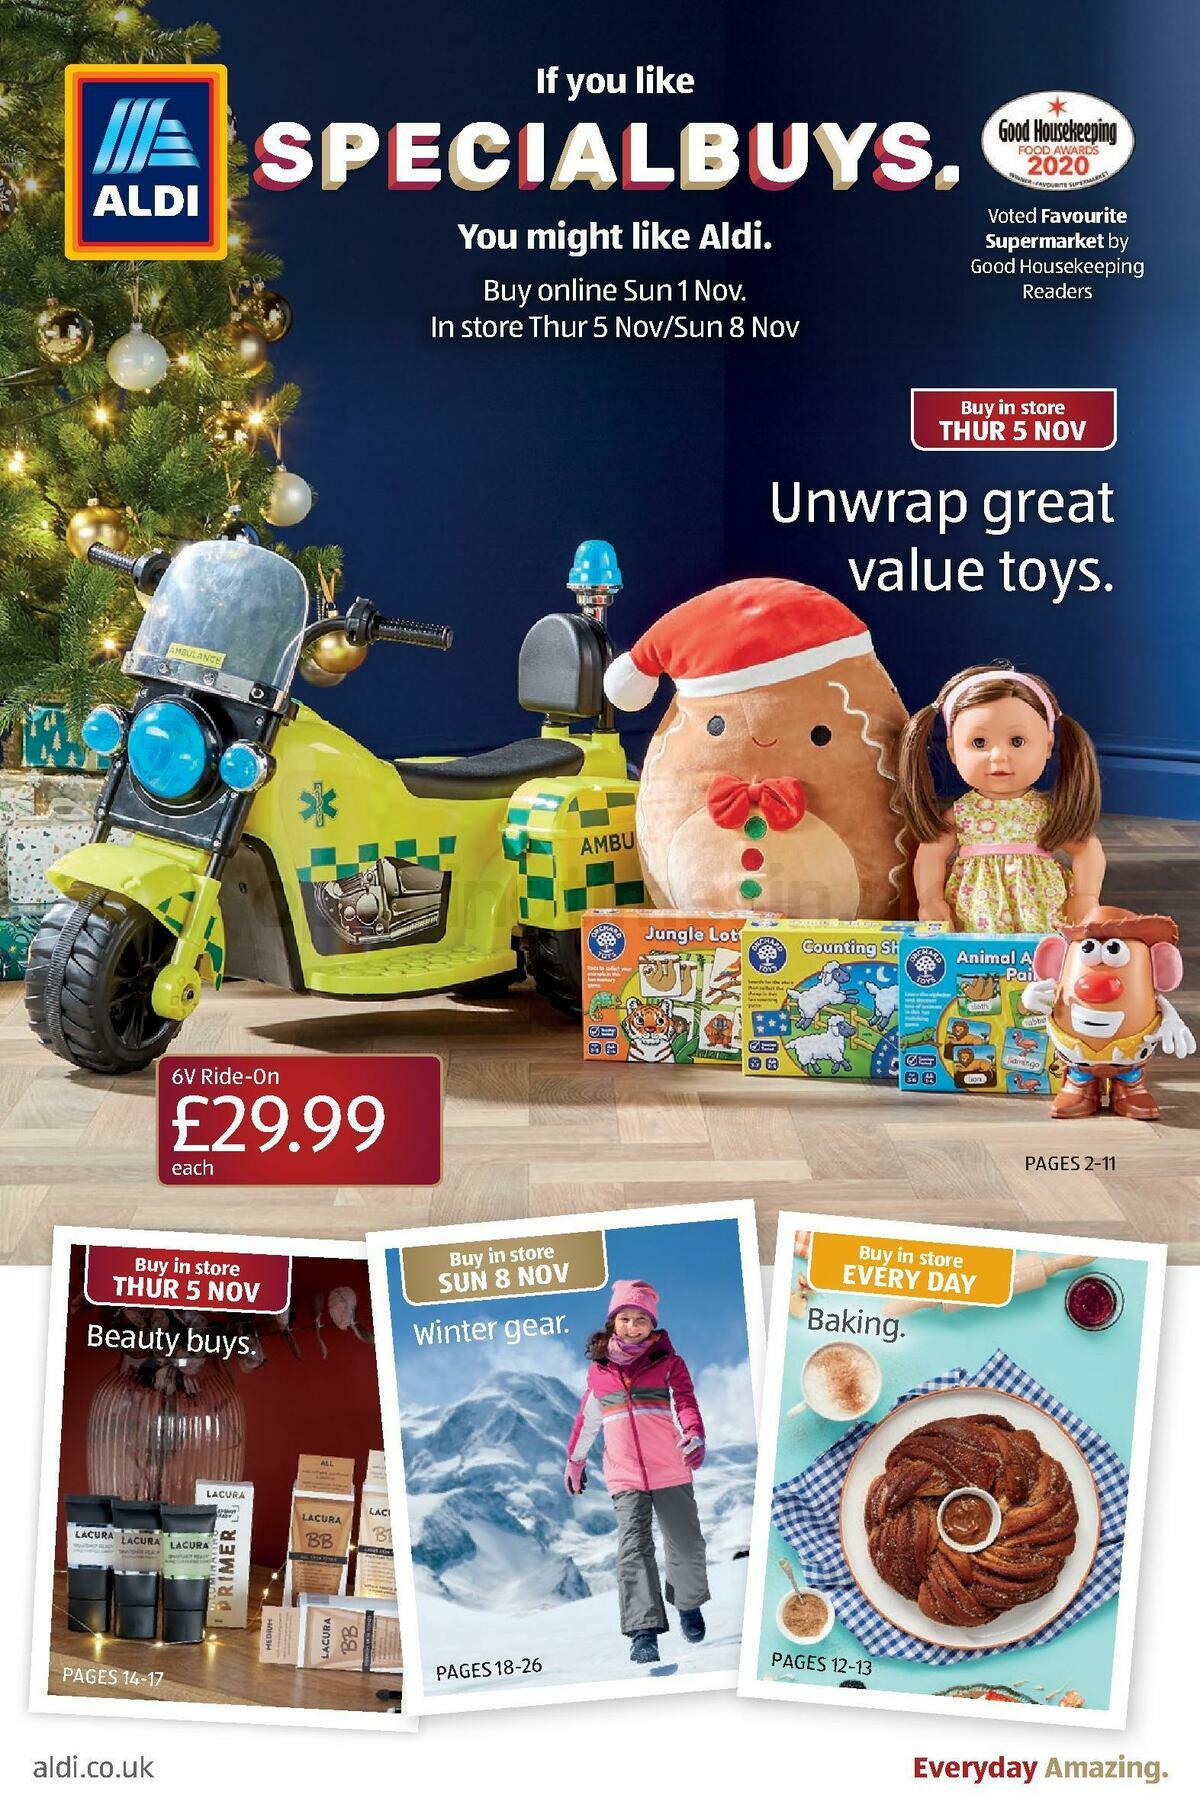 ALDI UK Offers & Special Buys from 1 November